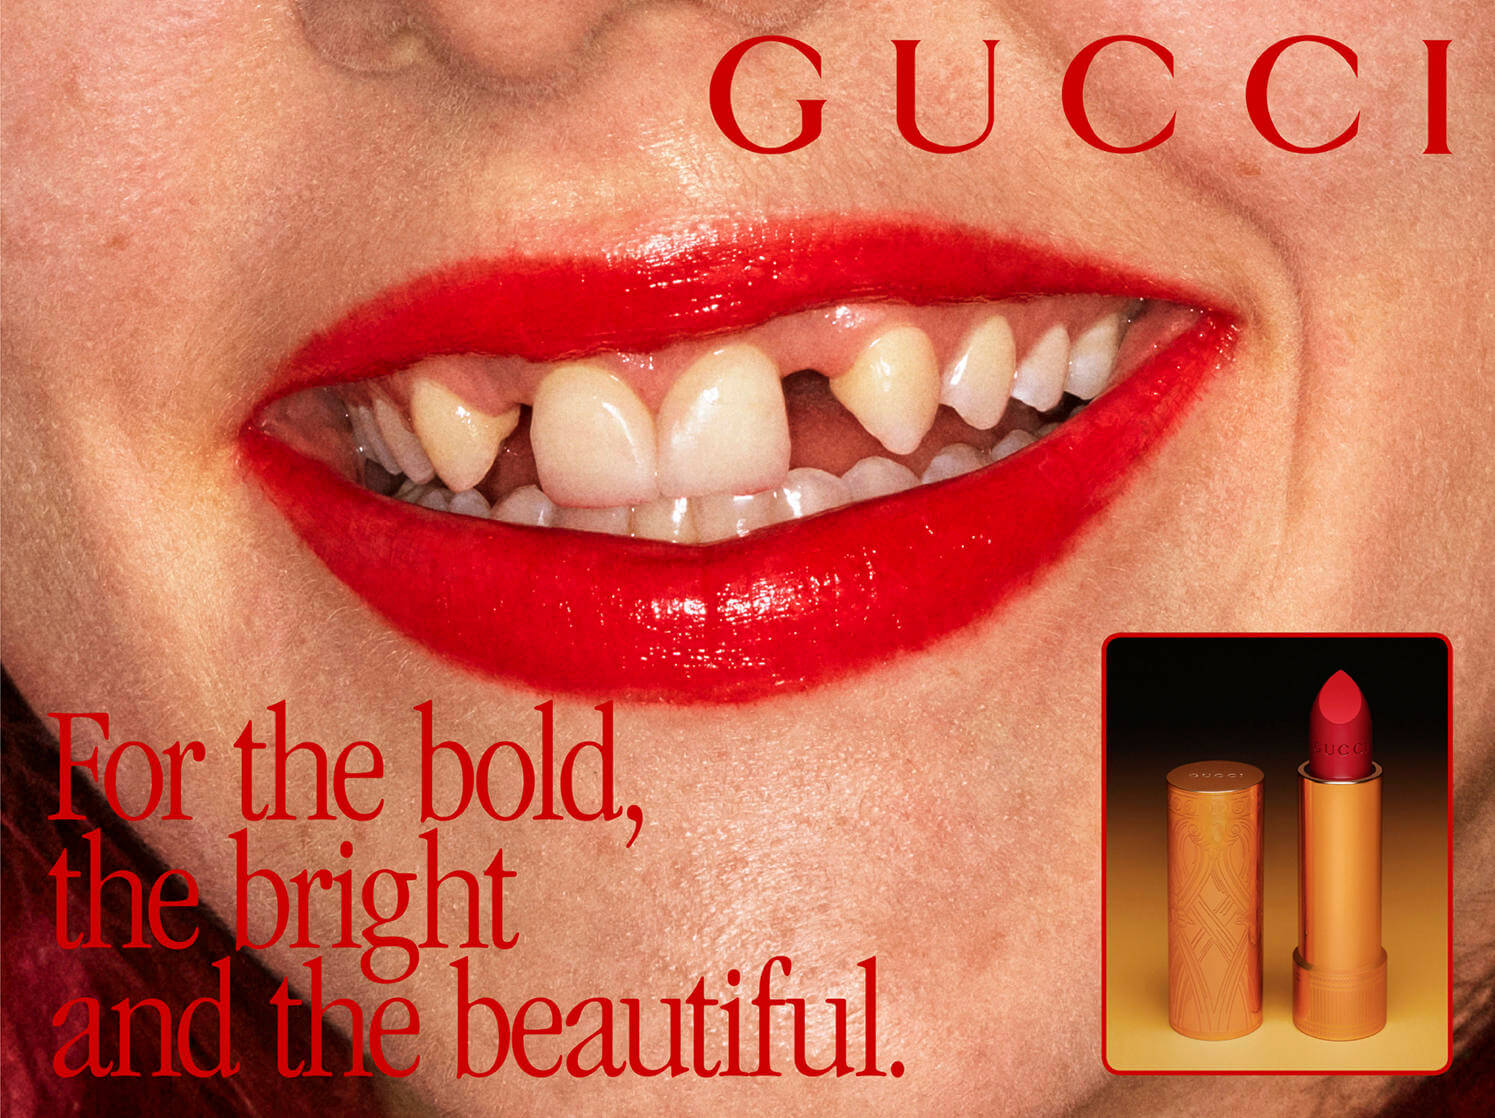 gucci missing teeth beauty lipstick campaign dani miller pop incisors lateral makeup line brief culture history simmonds christopher praised models